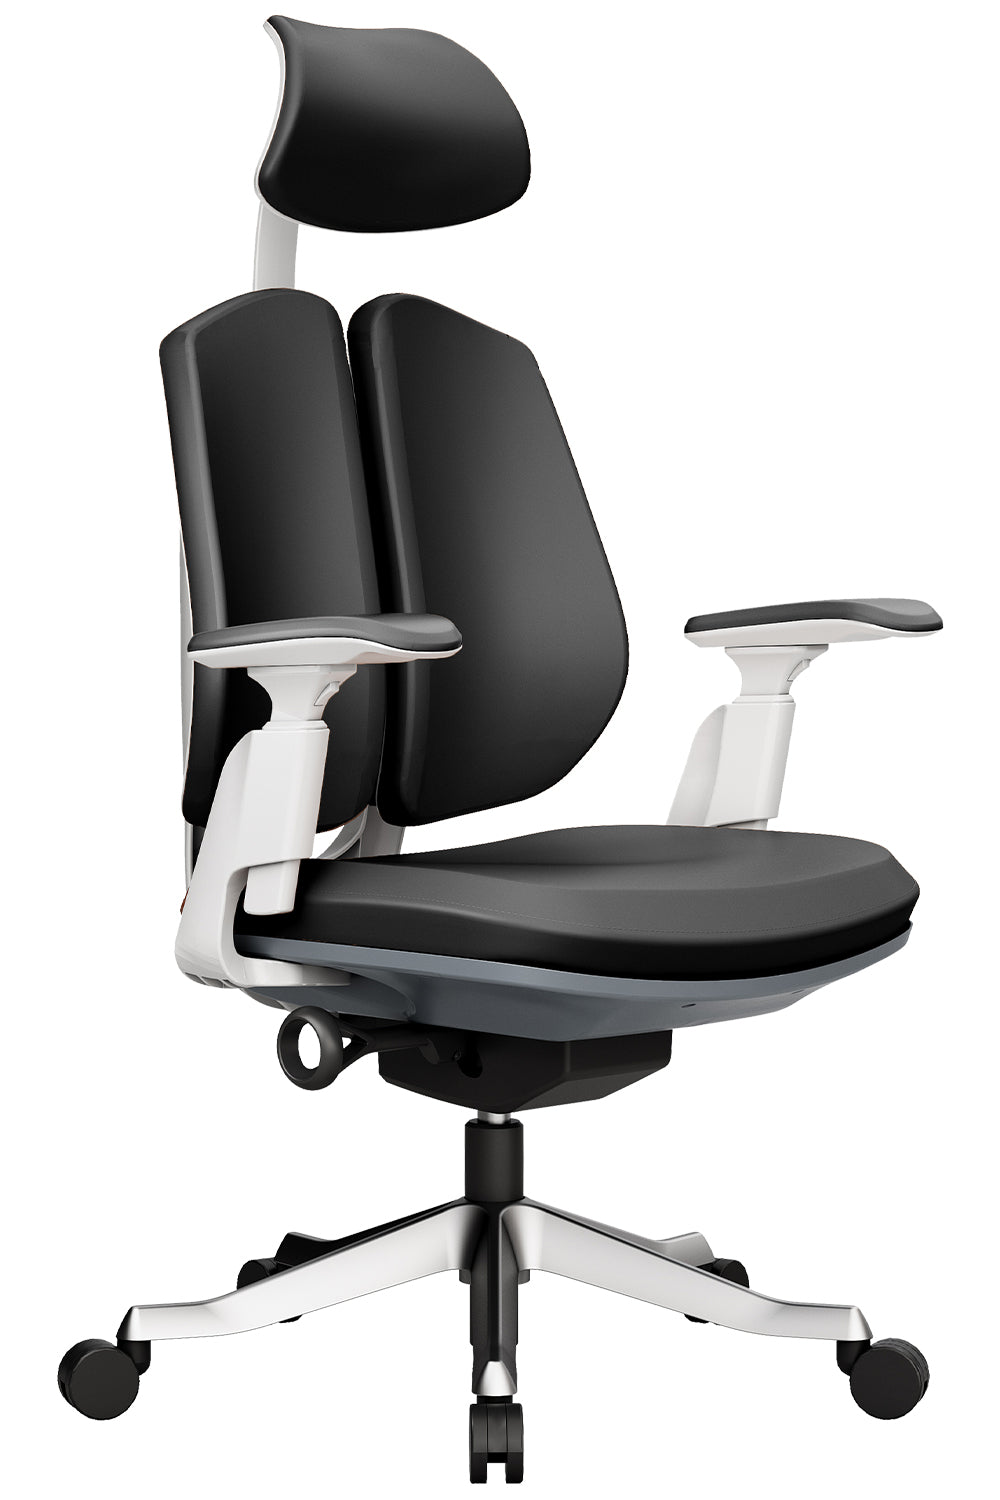 Dexter High Back 3D Executive Chair with Cushion Seat And Aluminum die cast Base - Black